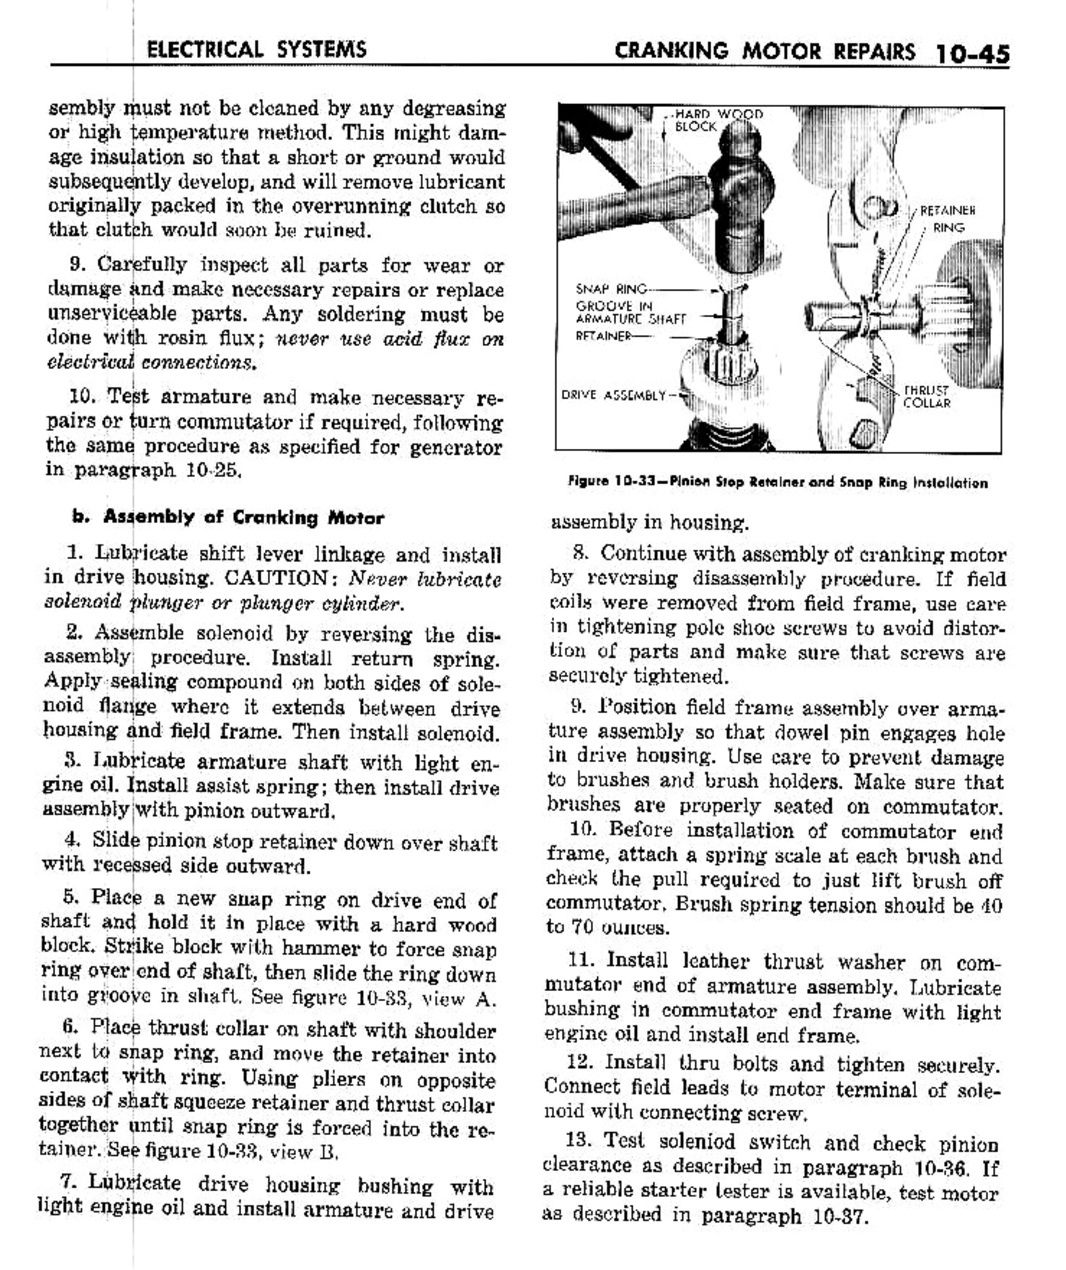 n_11 1959 Buick Shop Manual - Electrical Systems-045-045.jpg